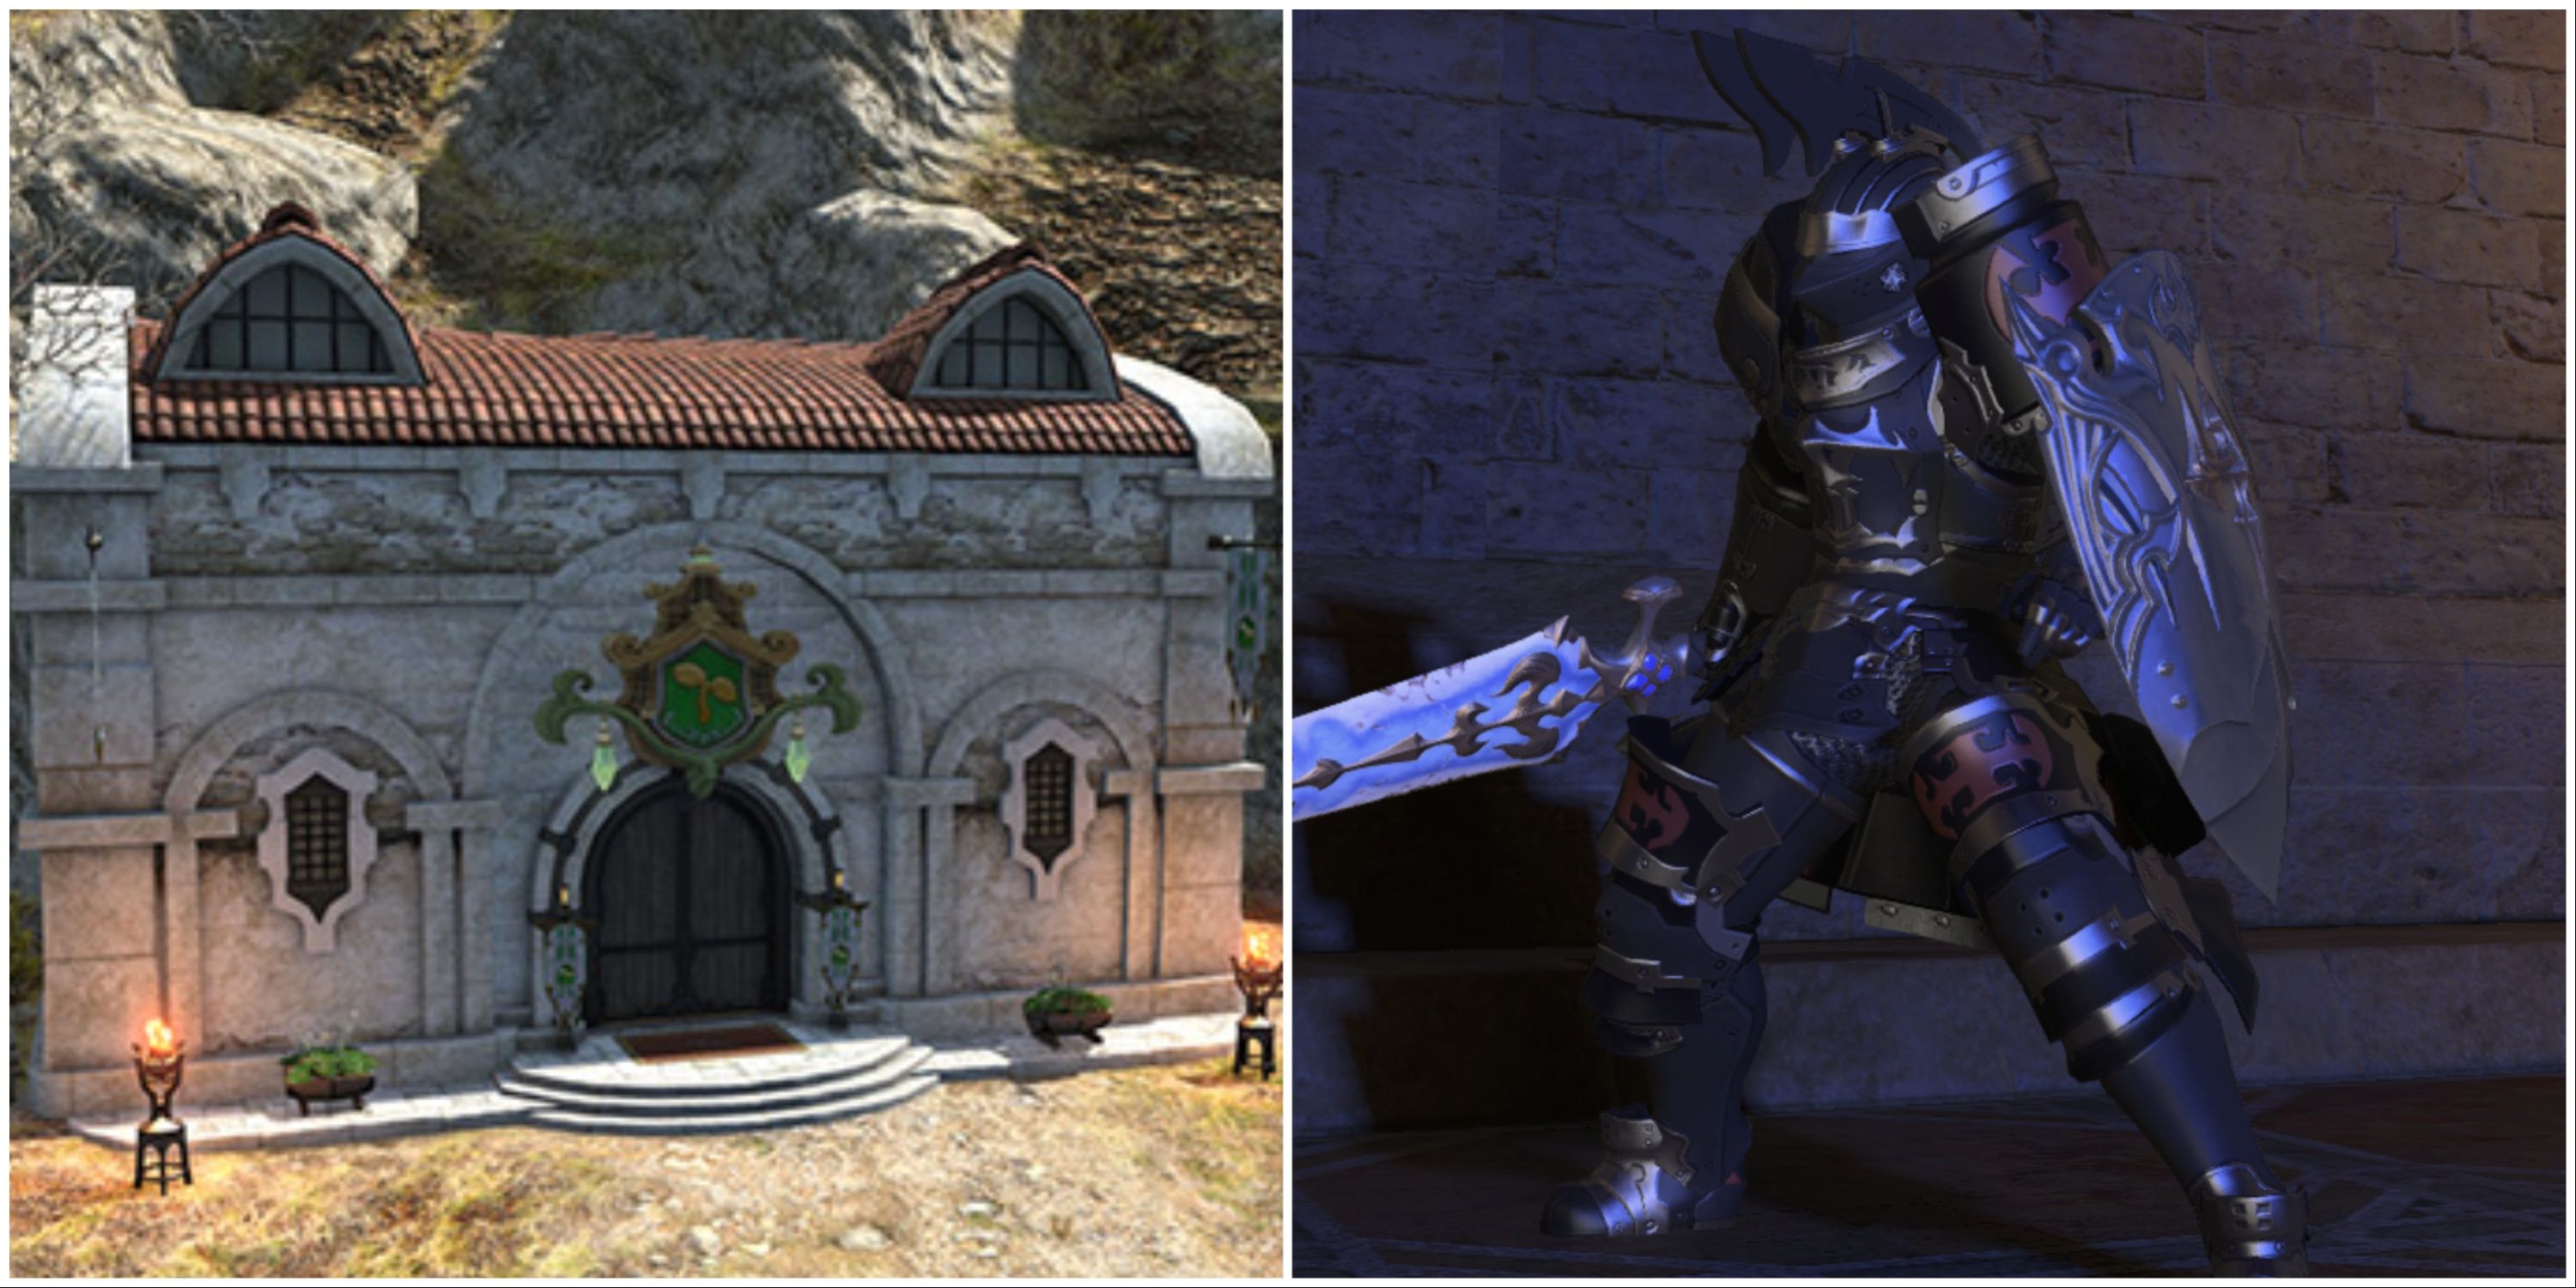 The Hall of the Novice and a Paladin in Final Fantasy 14